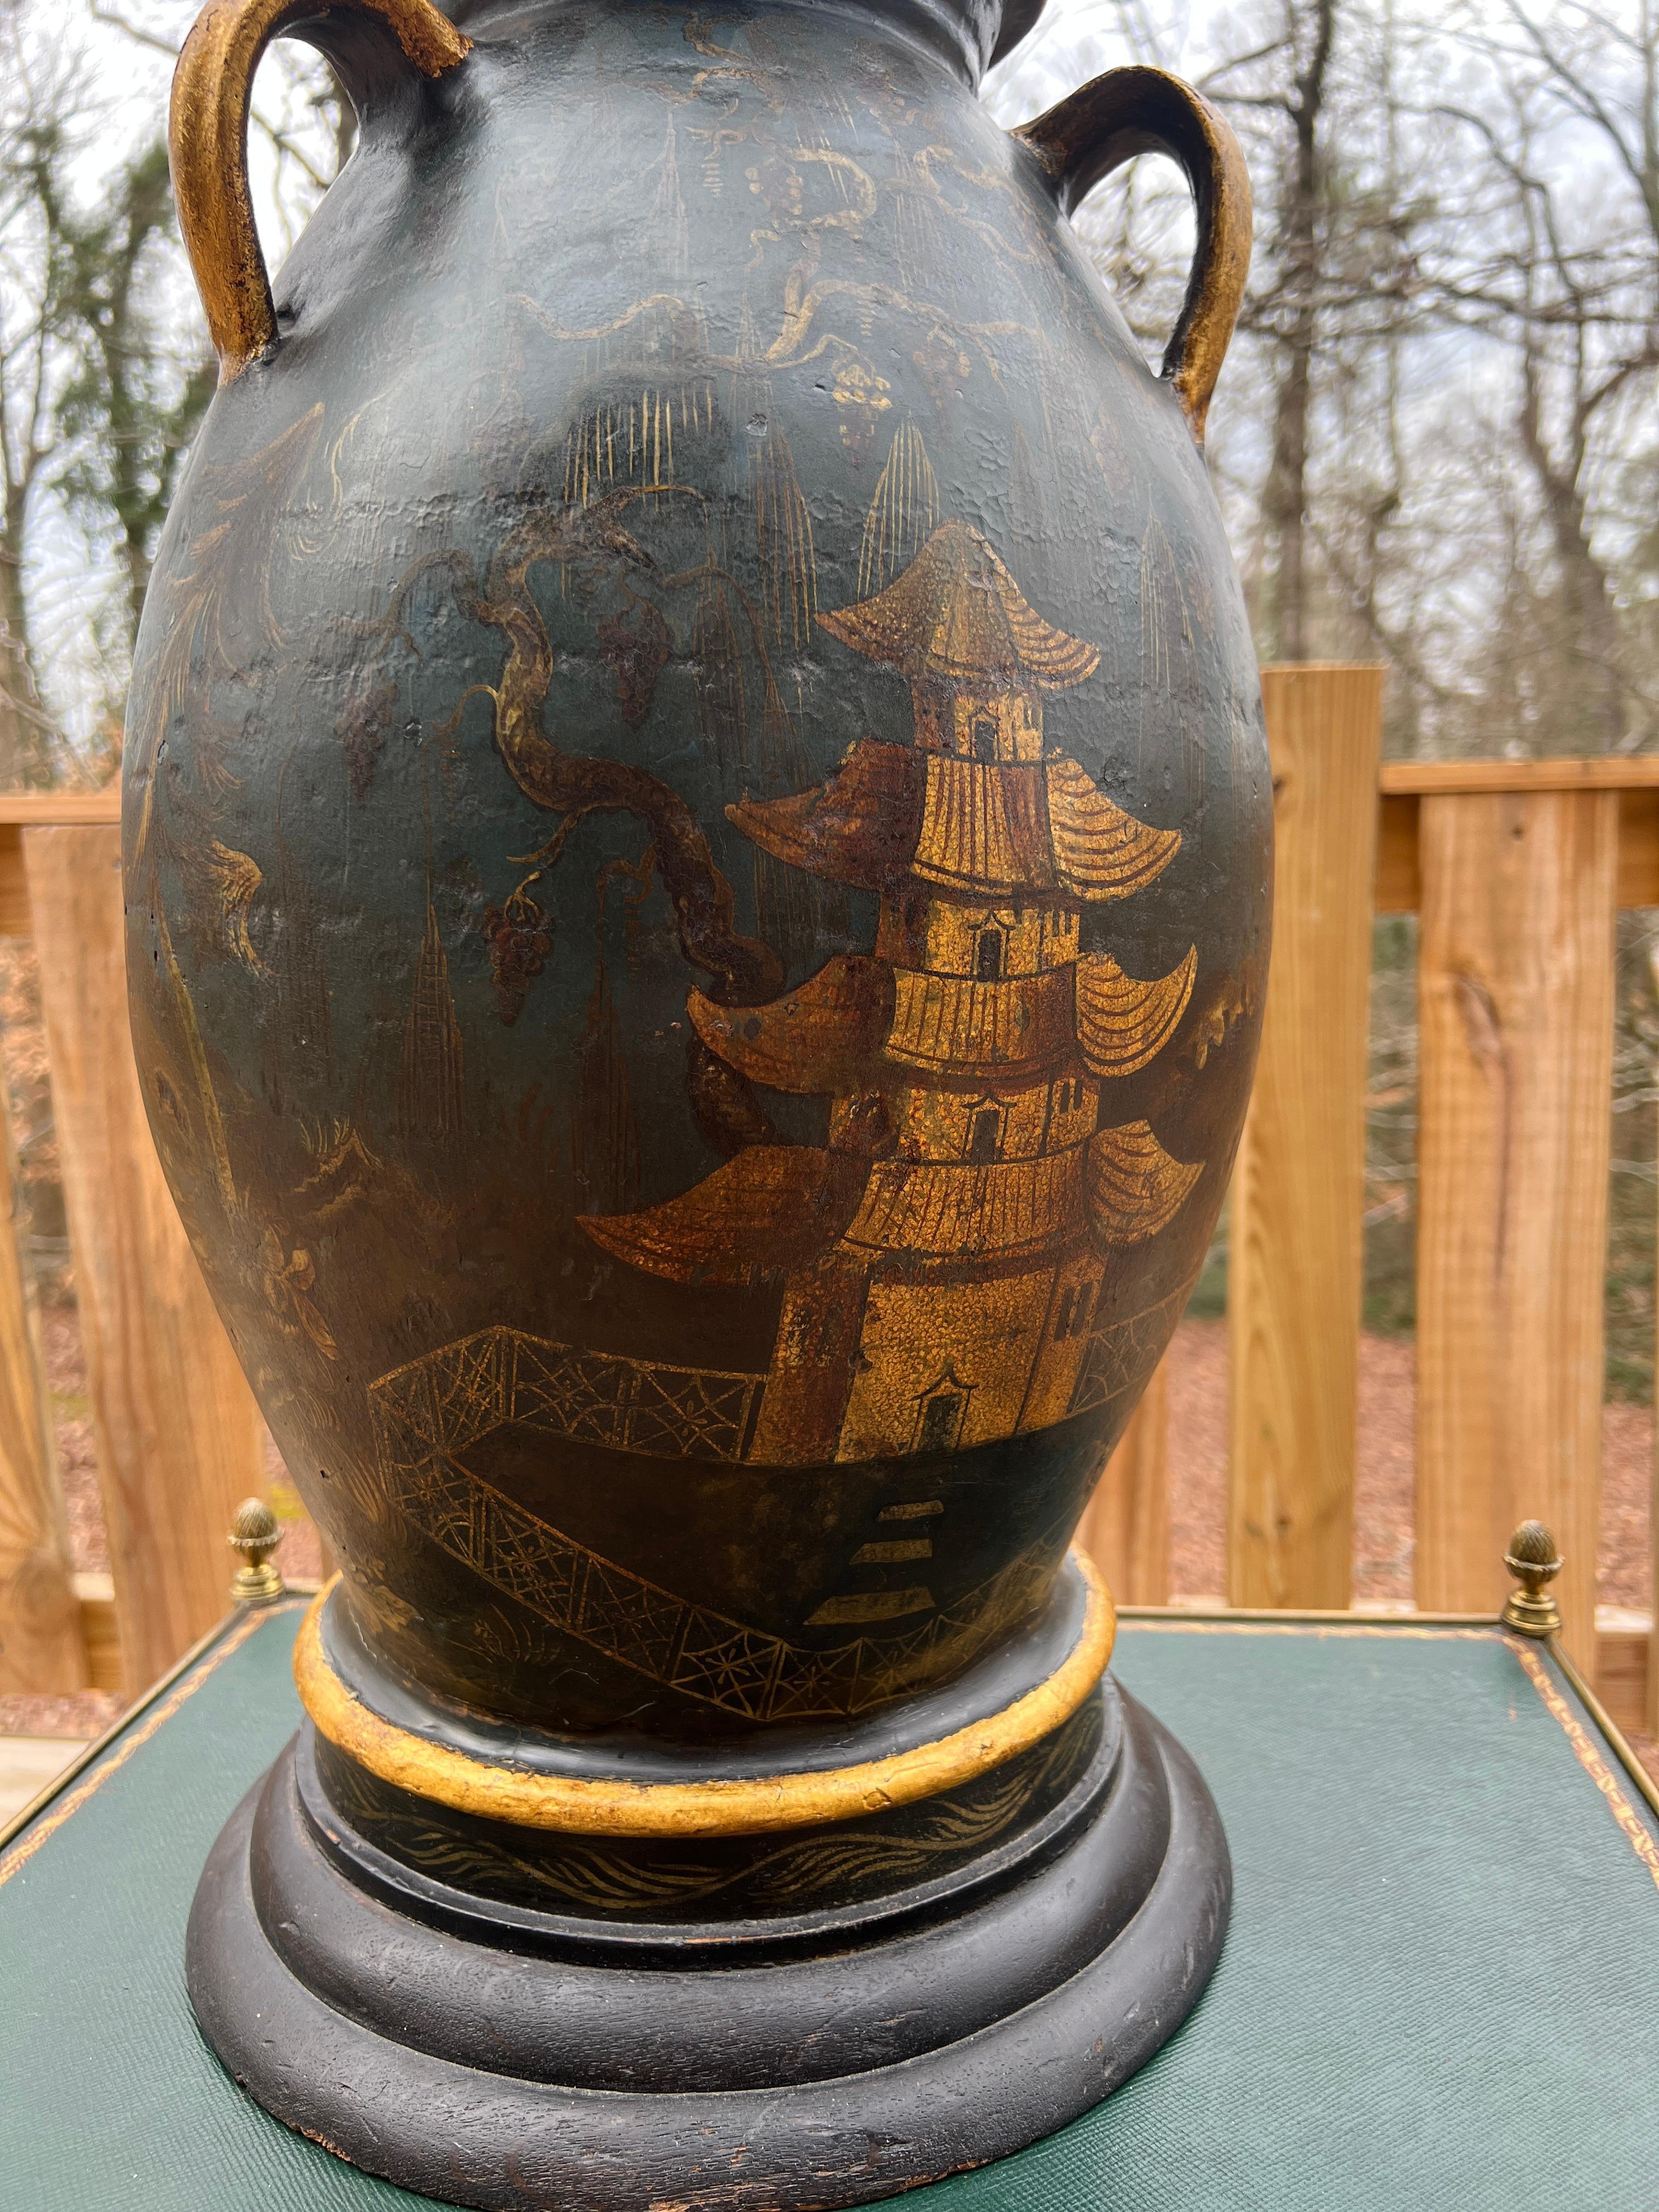 Regency Chinoiserie Decorated Gilt Wood & Tole Handled Urn or Centerpiece C 1820 For Sale 2